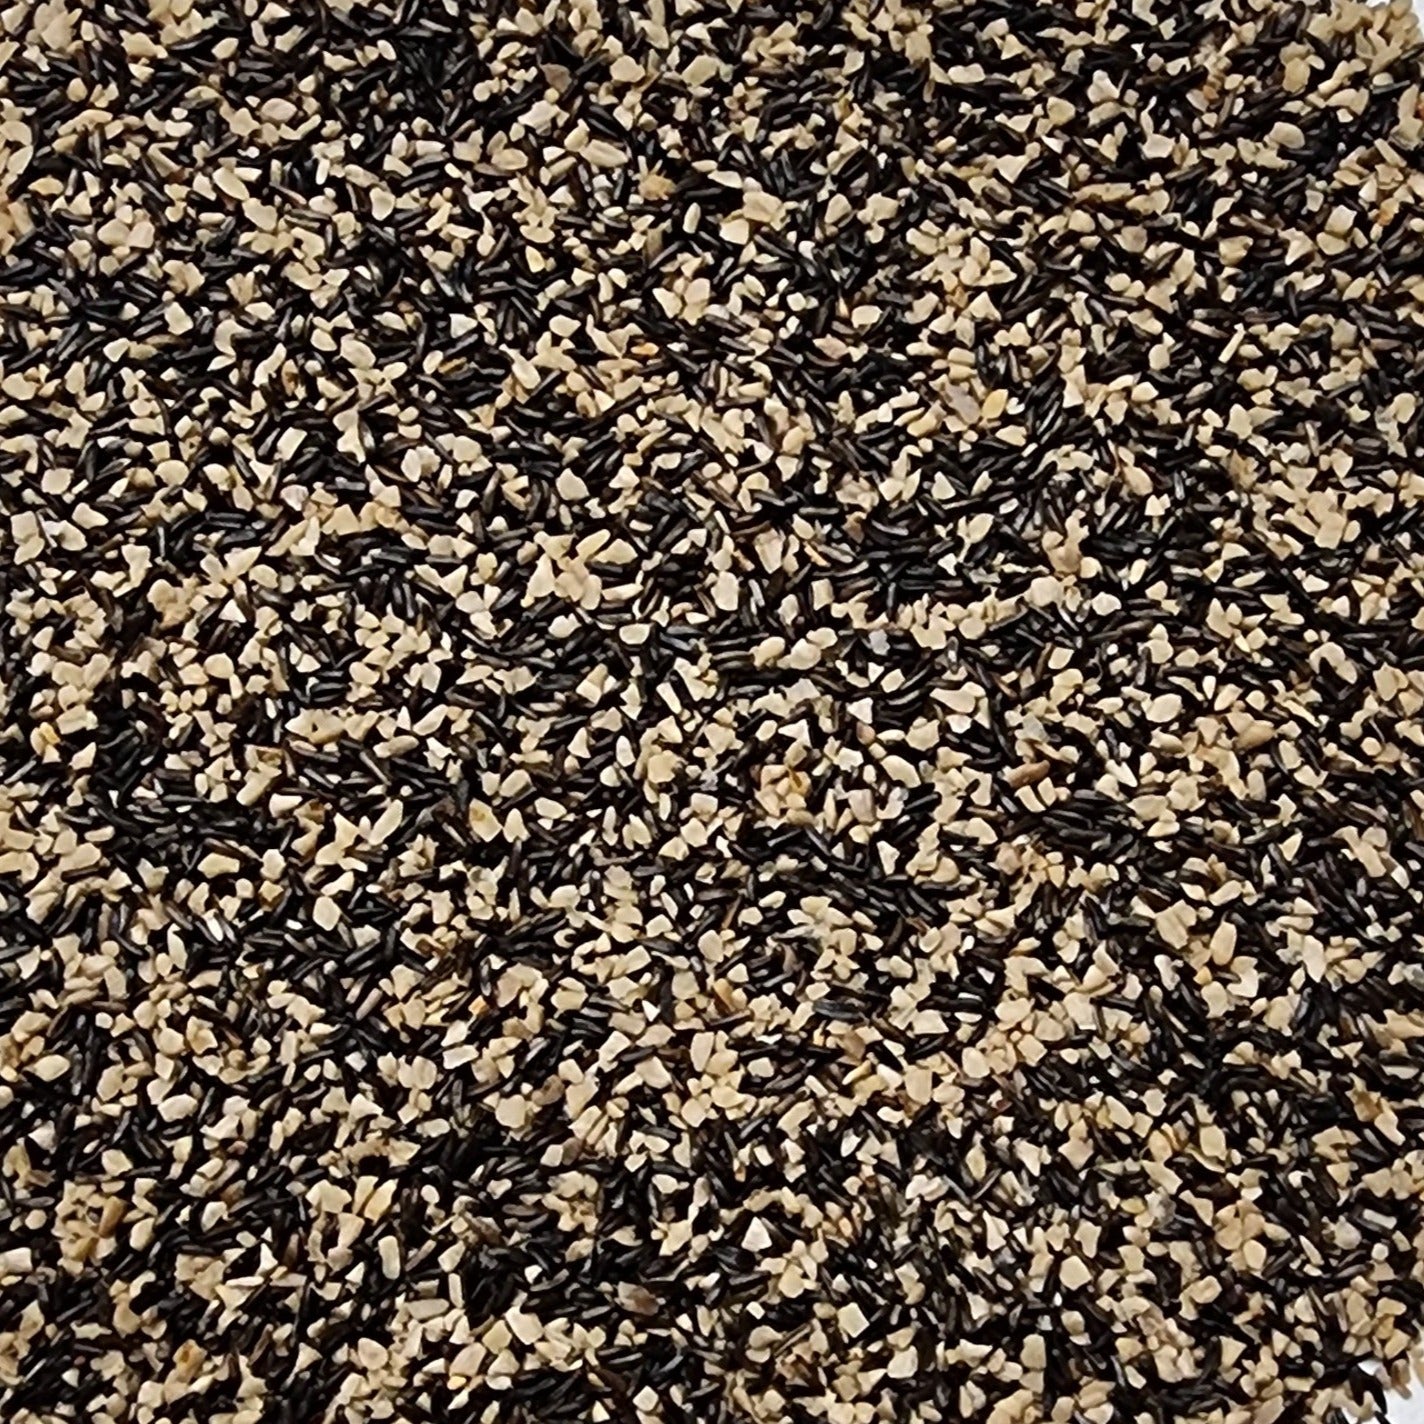 Black and tan finch seeds